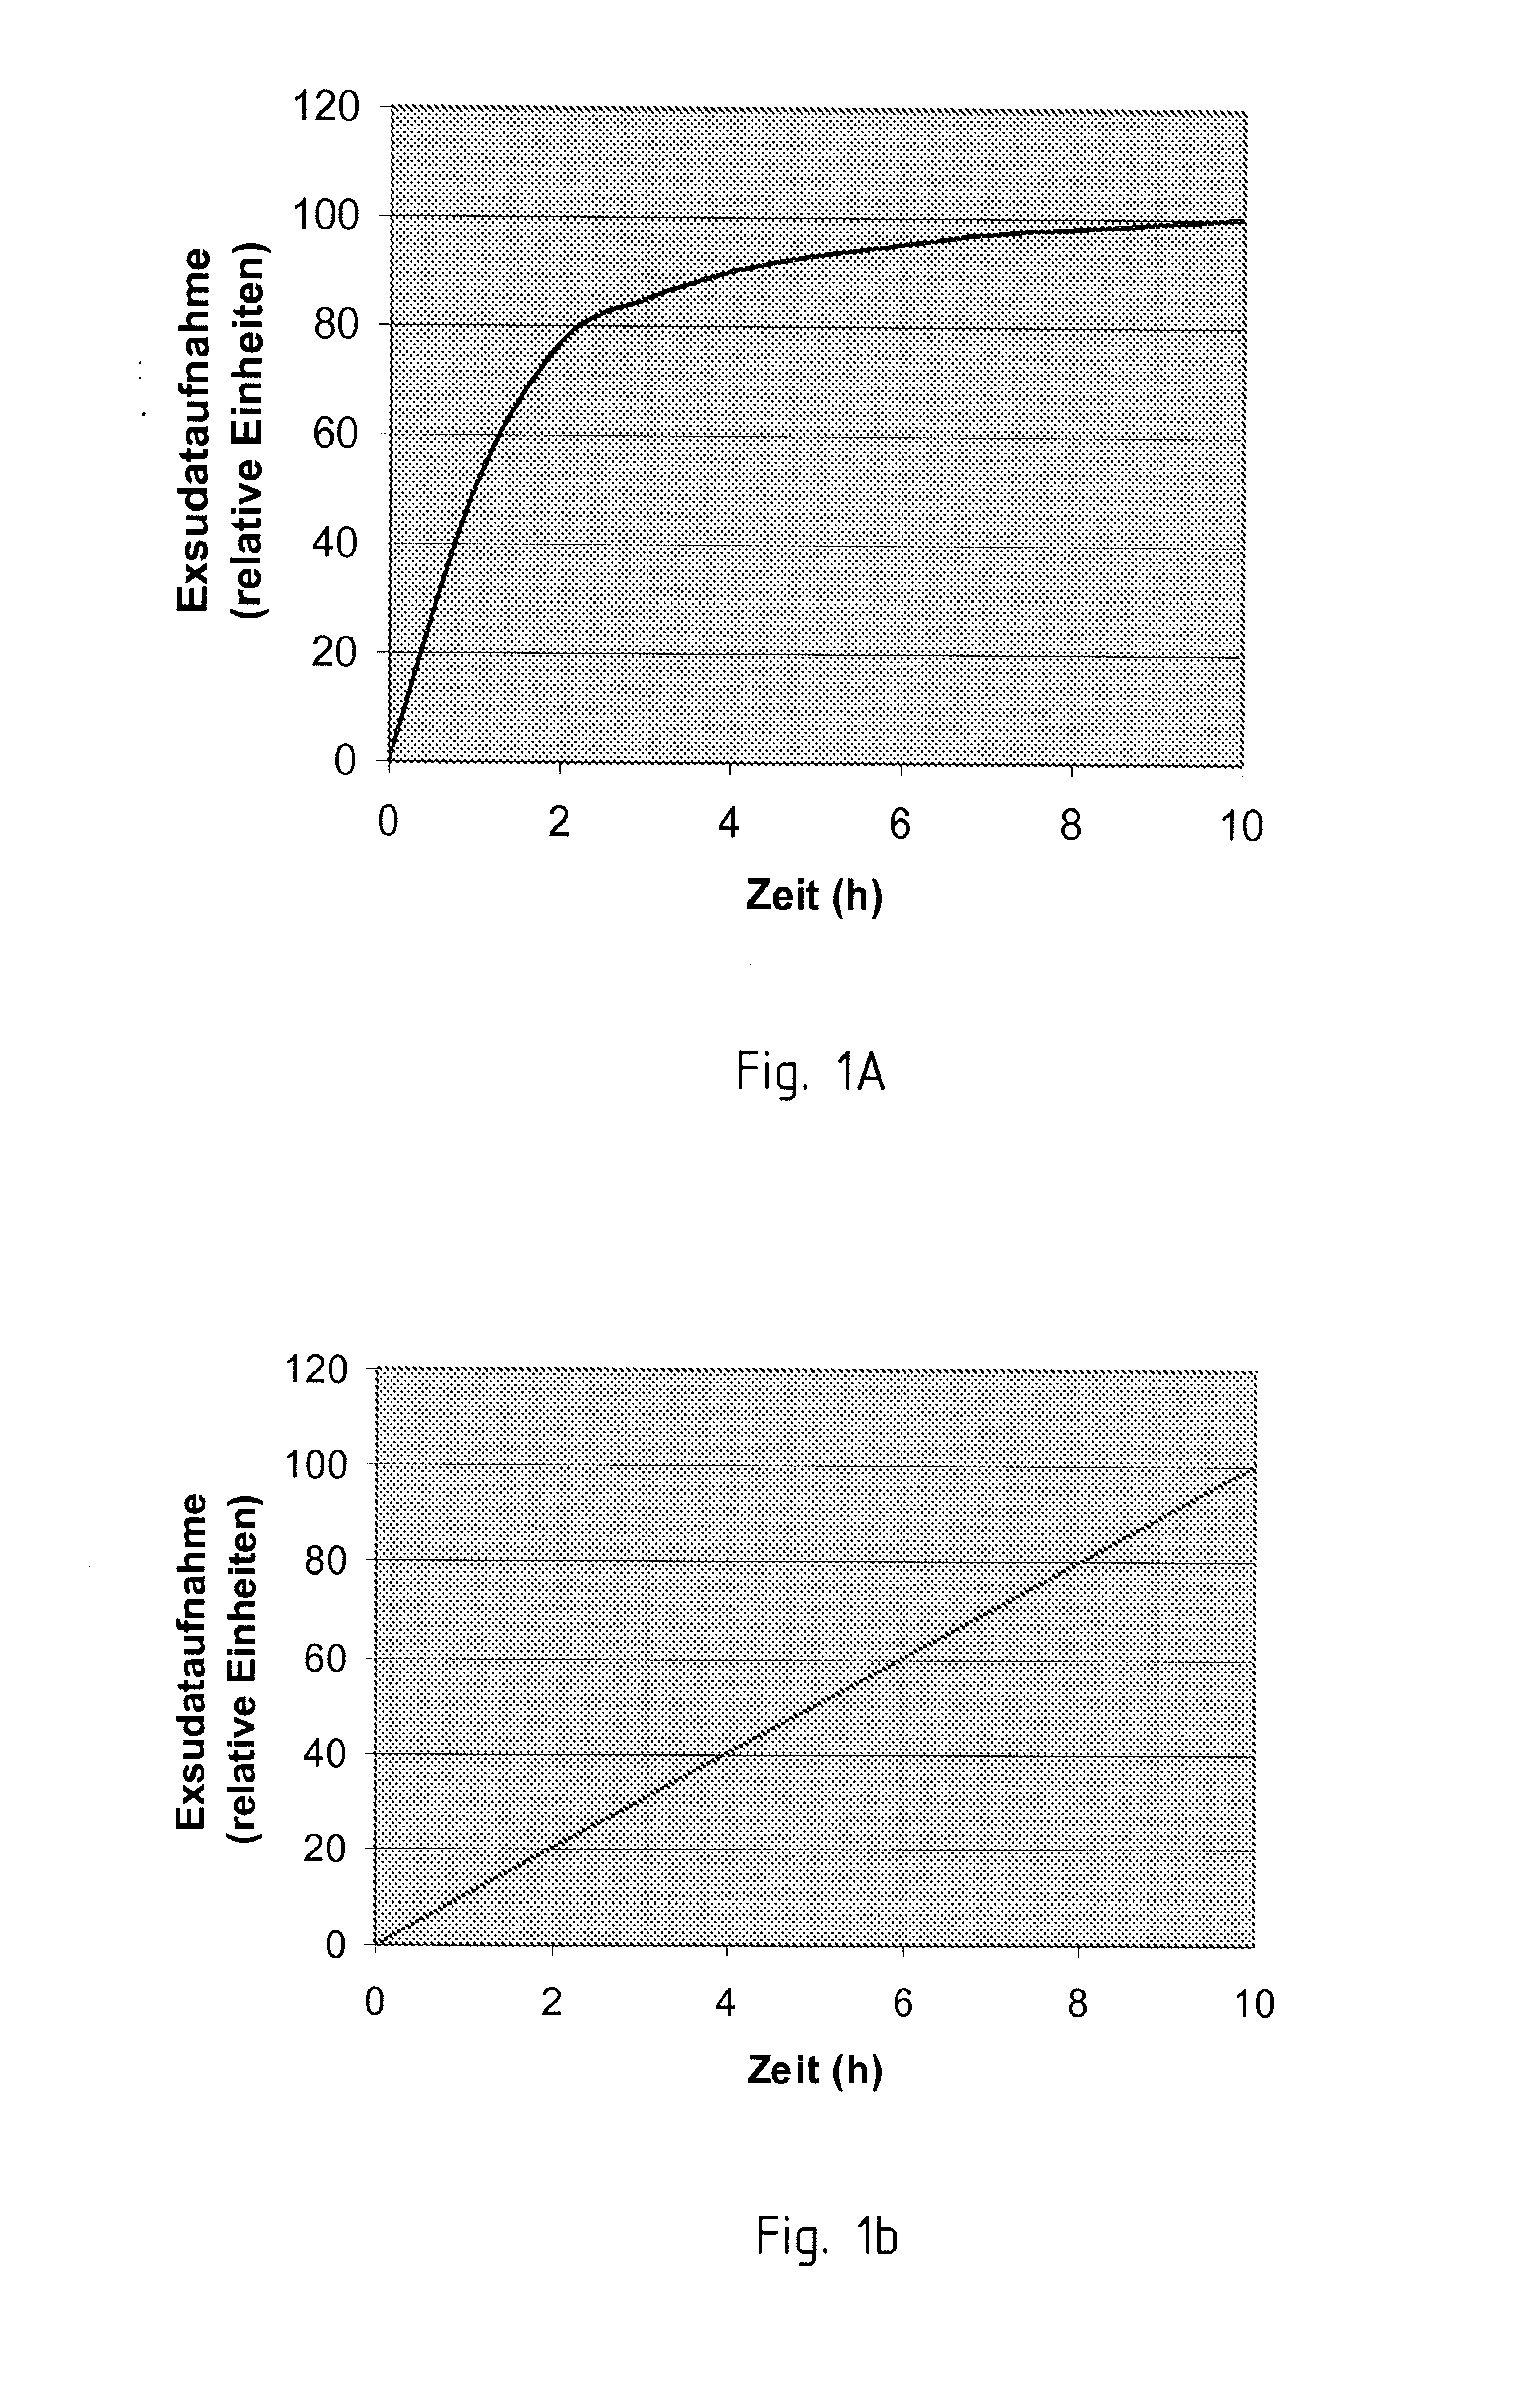 Composition containing at least one nutrivite, at least one disinfecting or decontaminating, and/or at least one protease-inhibiting active compound and/or active compound complex